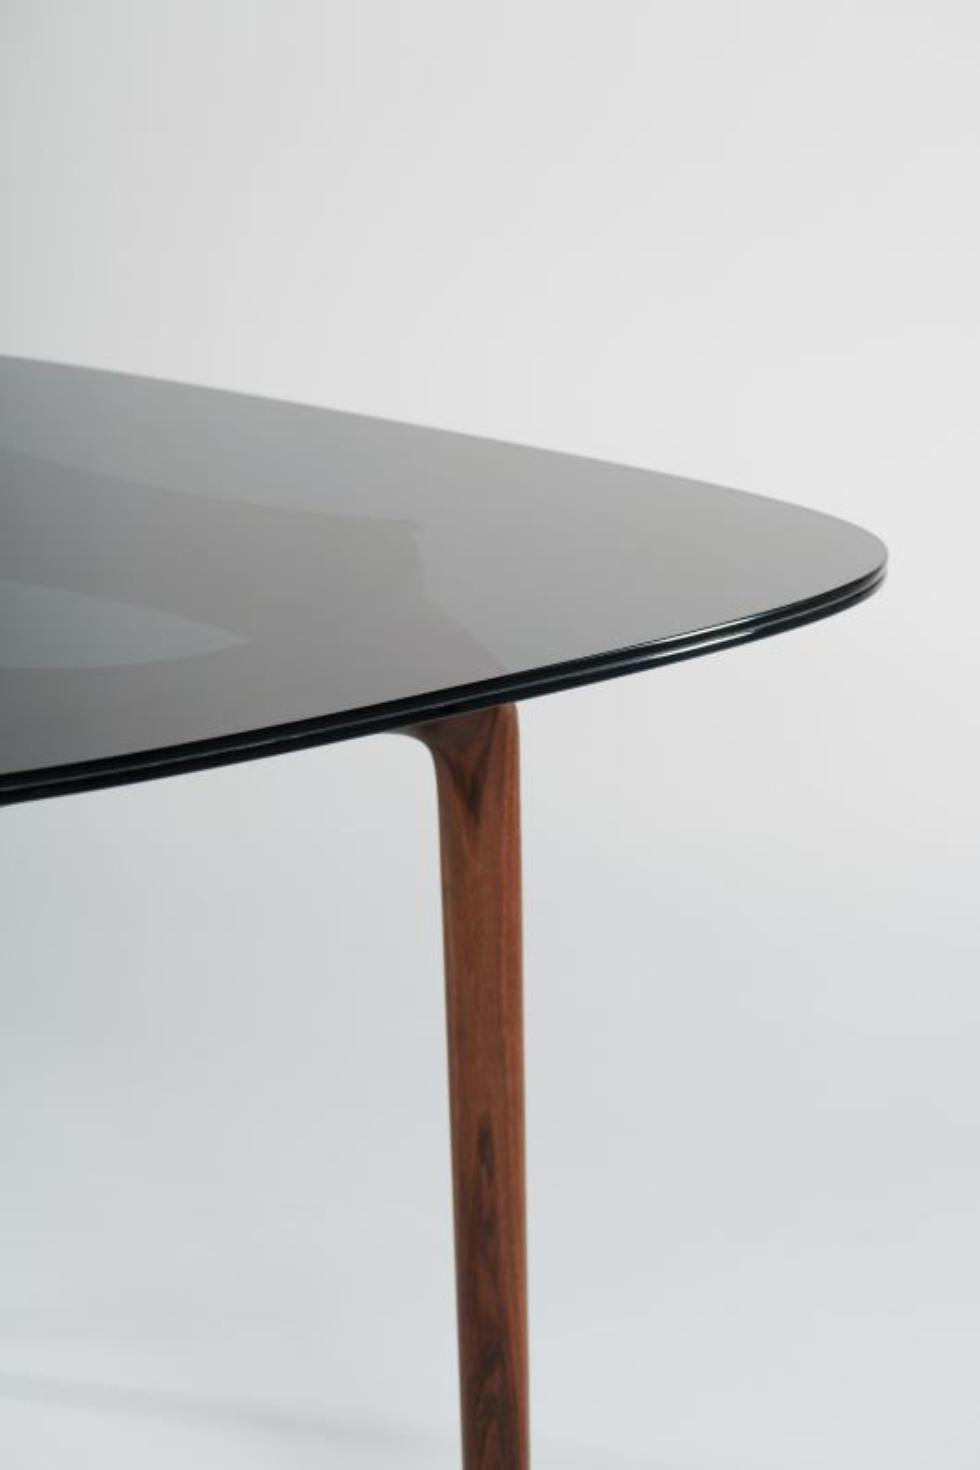 Artisan Pascal square dining table